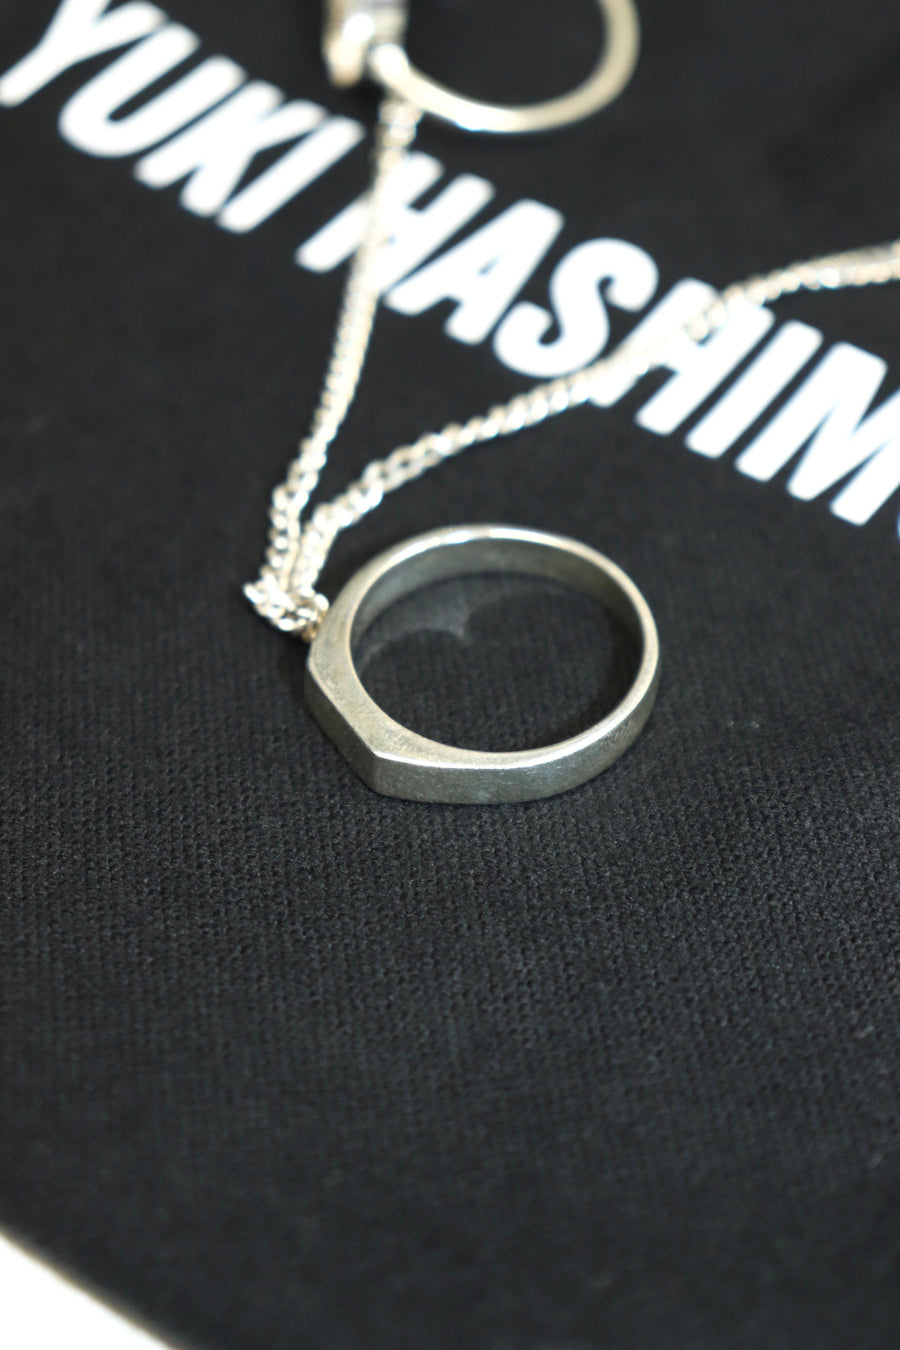 YUKI HASHIMOTO × P.A.A  household rings top neckless 3